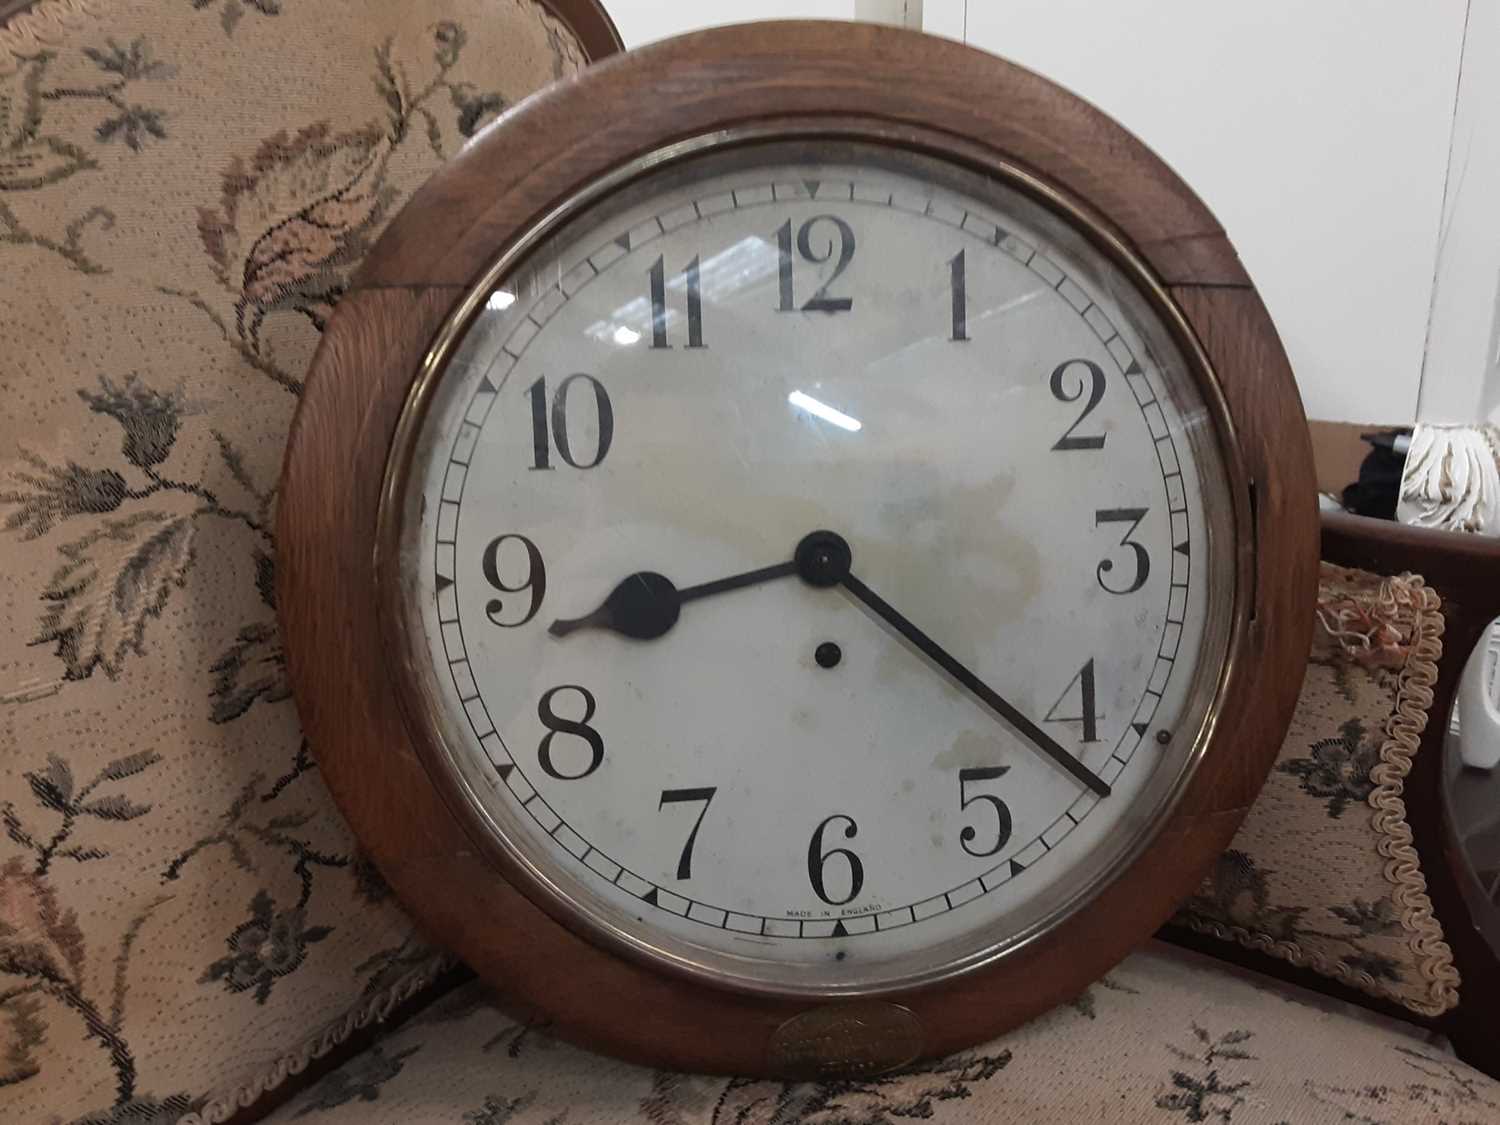 Lot 4 - Early 20th century Enfield circular wall clock in oak case, dial is 30cm diameter,  bearing label - The Property Of The St James And Pall Mall Electric Light Co Limited